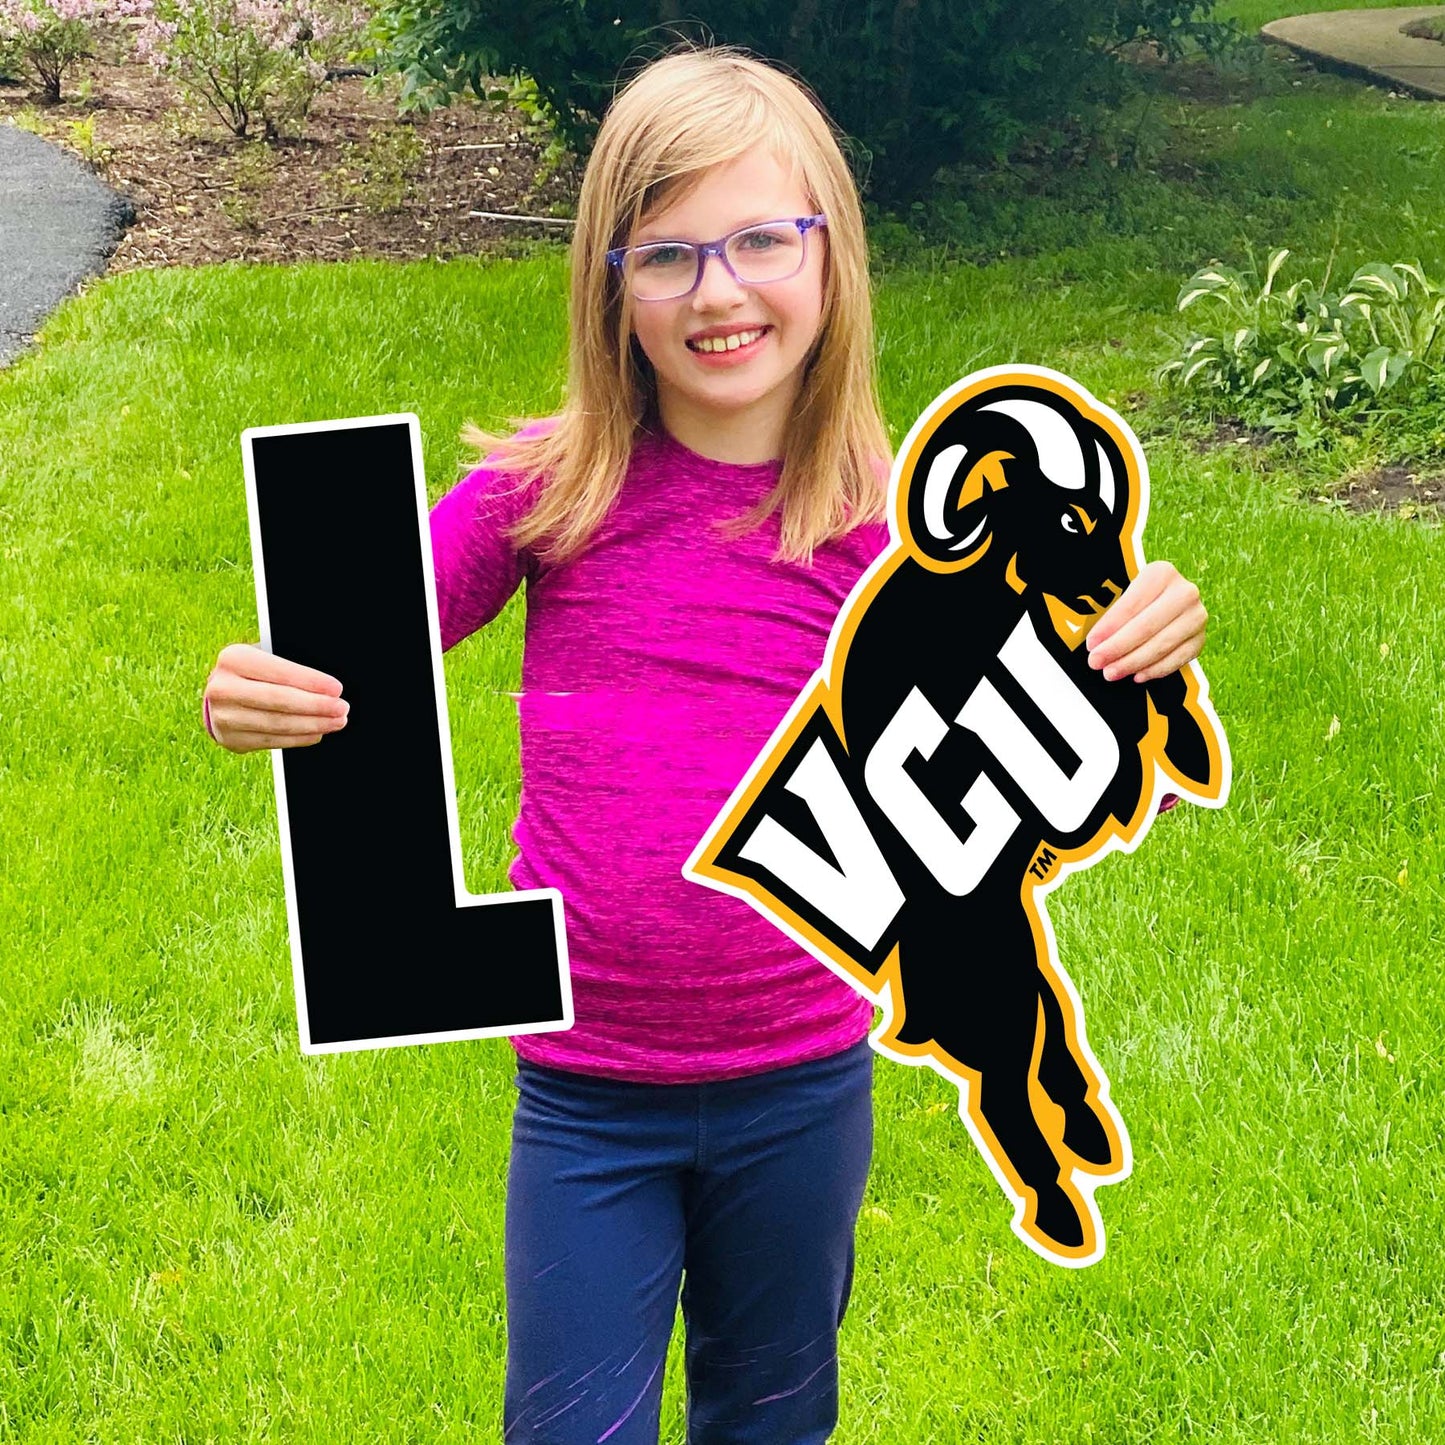 Let's Go VCU 7ft Lawn Sign Banner Decoration - Virginia Book Company